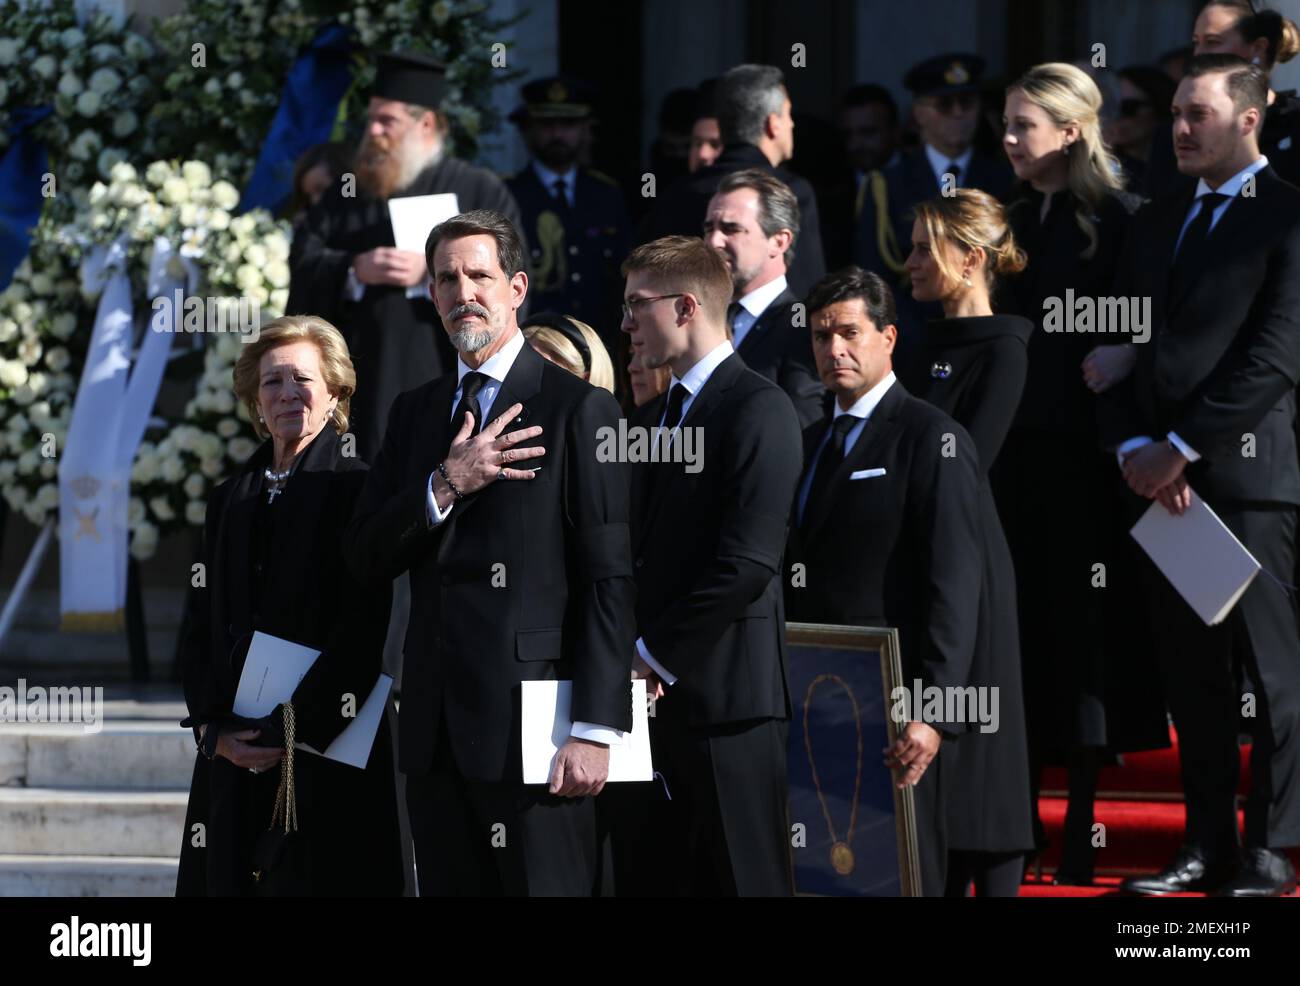 Queen Anne Marie of Greece with her family at the funeral for former King Constantine II of Greece, in Metropolitan Cathedral Stock Photo